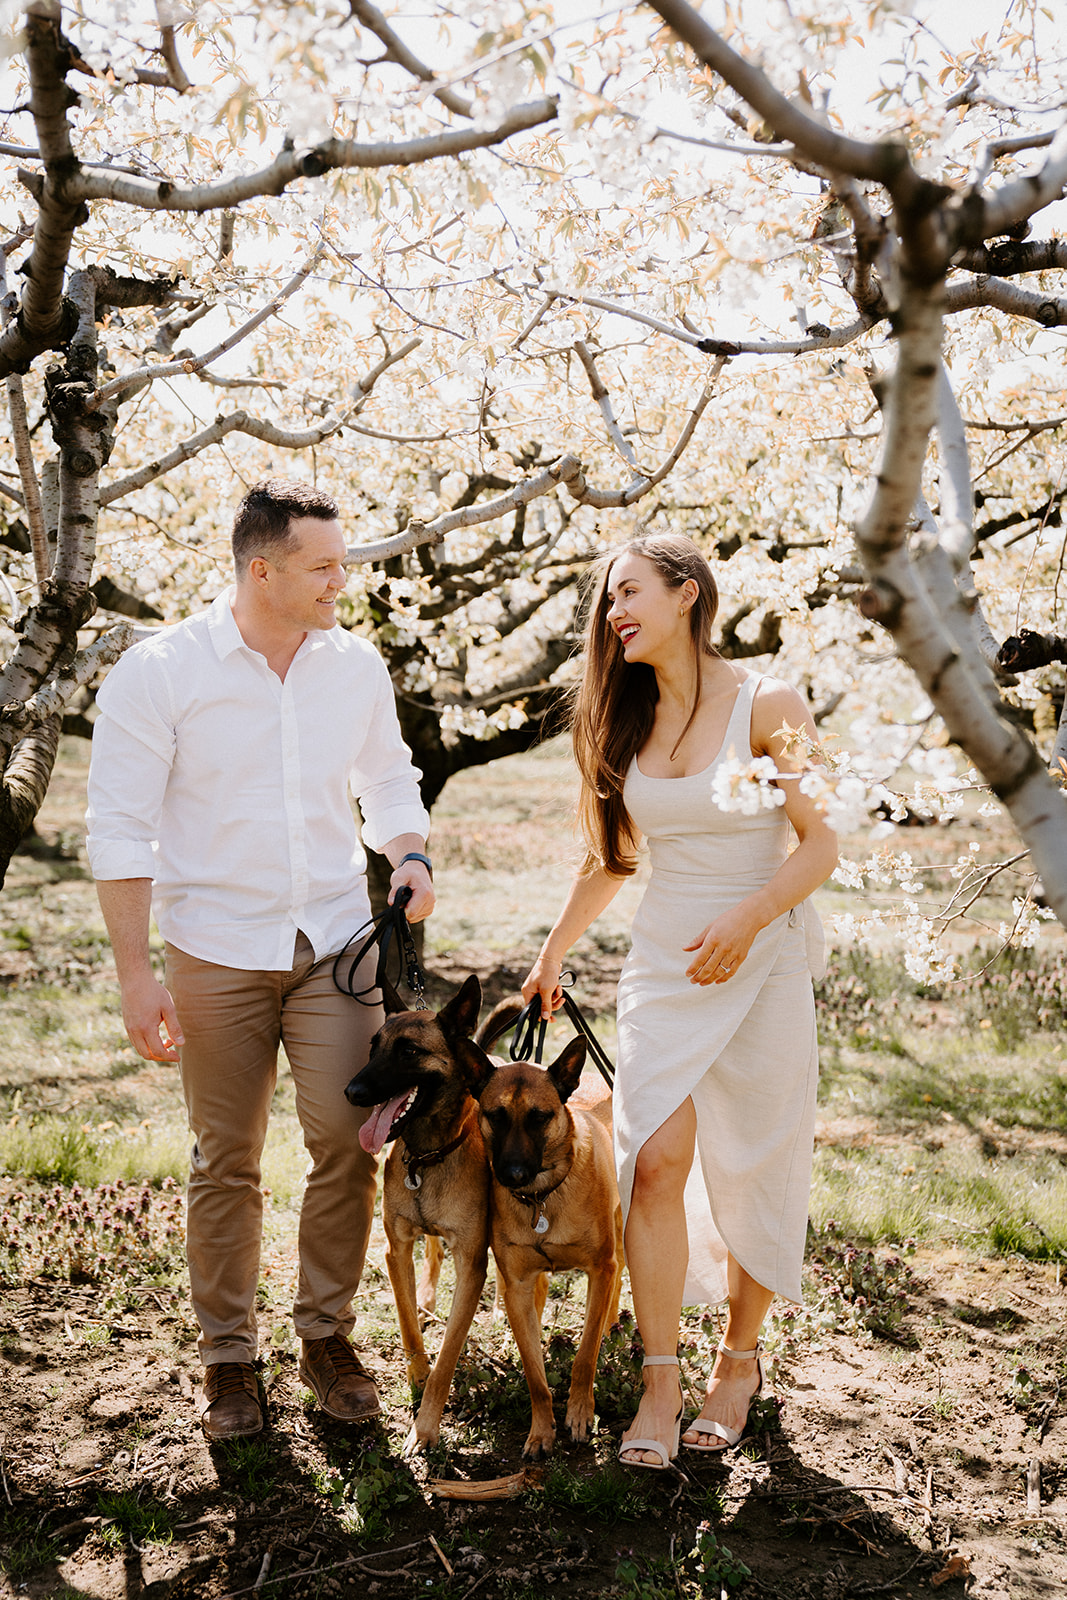 A couple and two dogs standing underneath a cherry blossom tree and looking at each other.